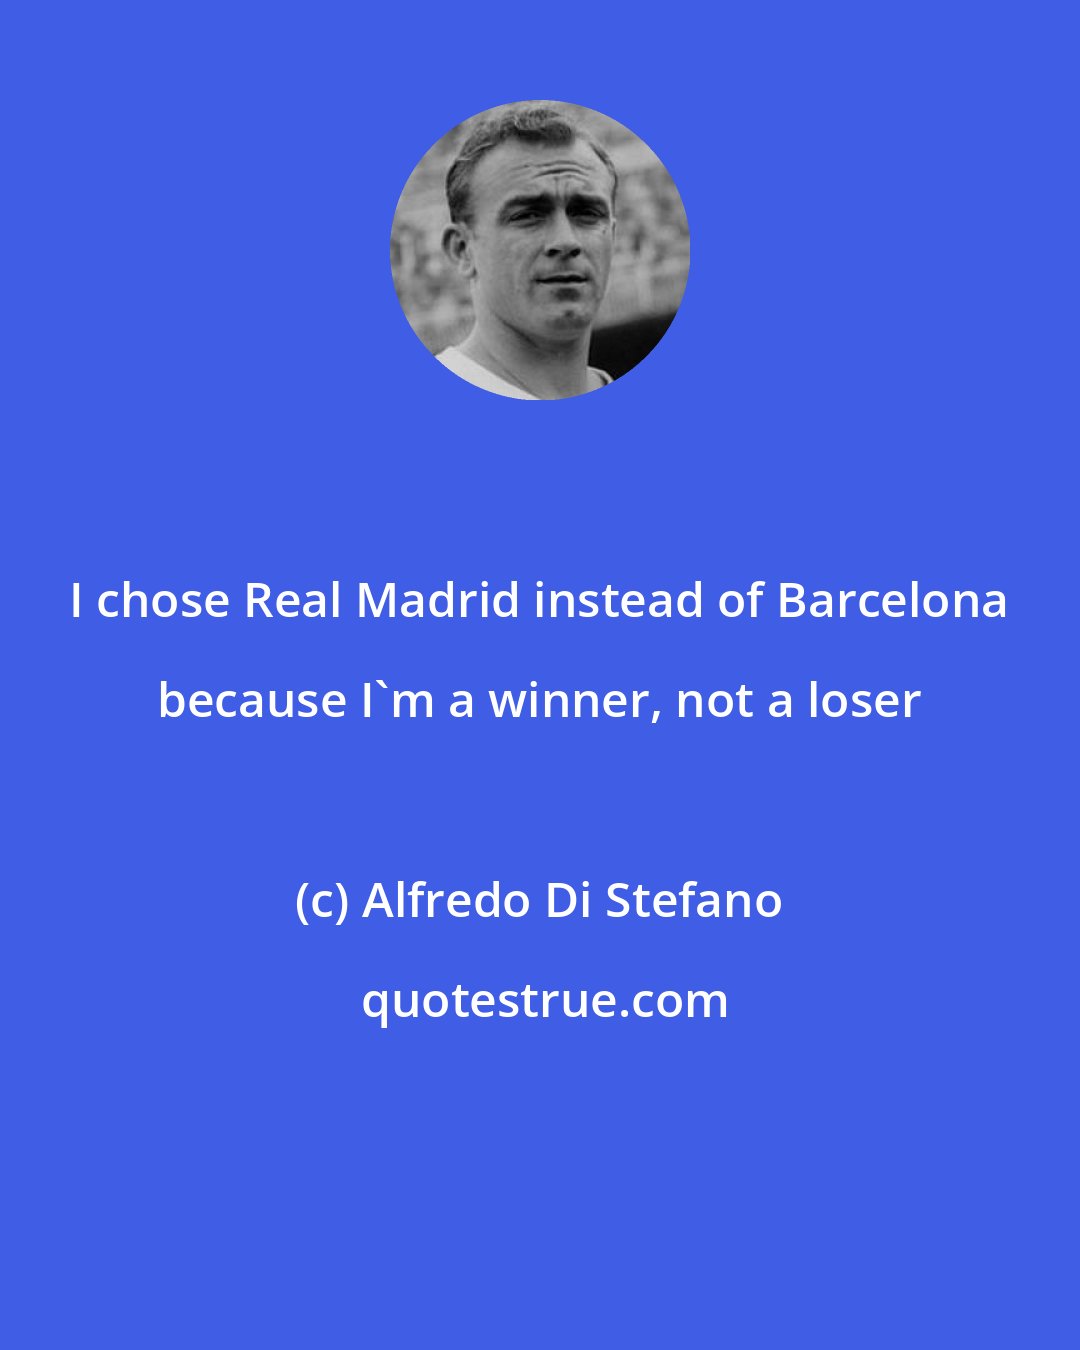 Alfredo Di Stefano: I chose Real Madrid instead of Barcelona because I'm a winner, not a loser